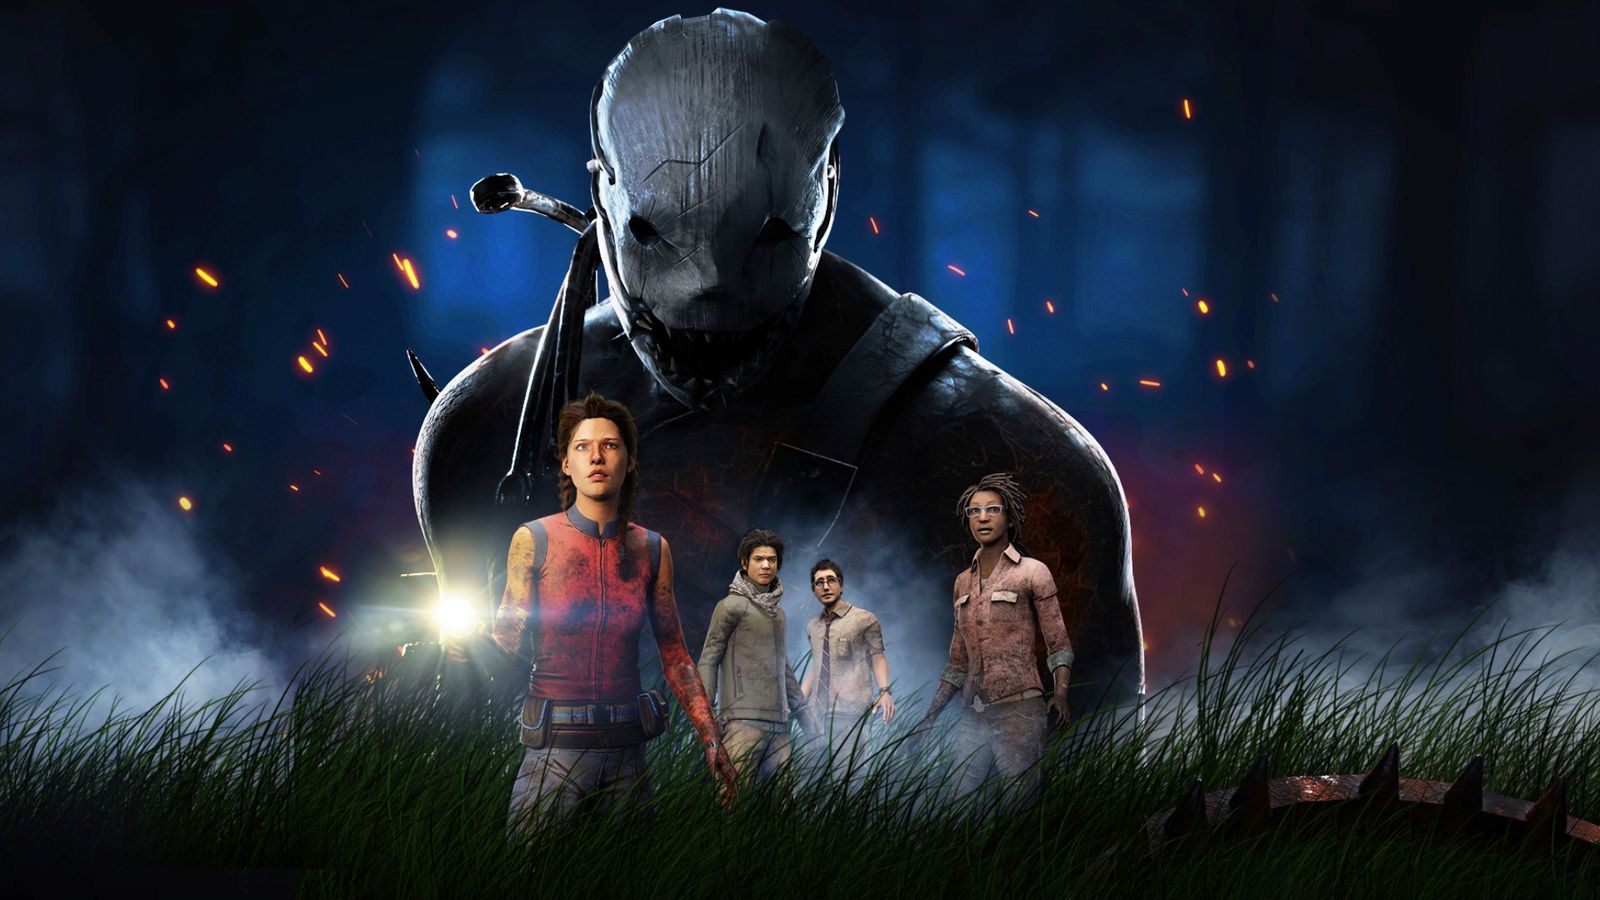 Screenshot from Dead by Daylight Mobile, with a masked killer looming over four survivors